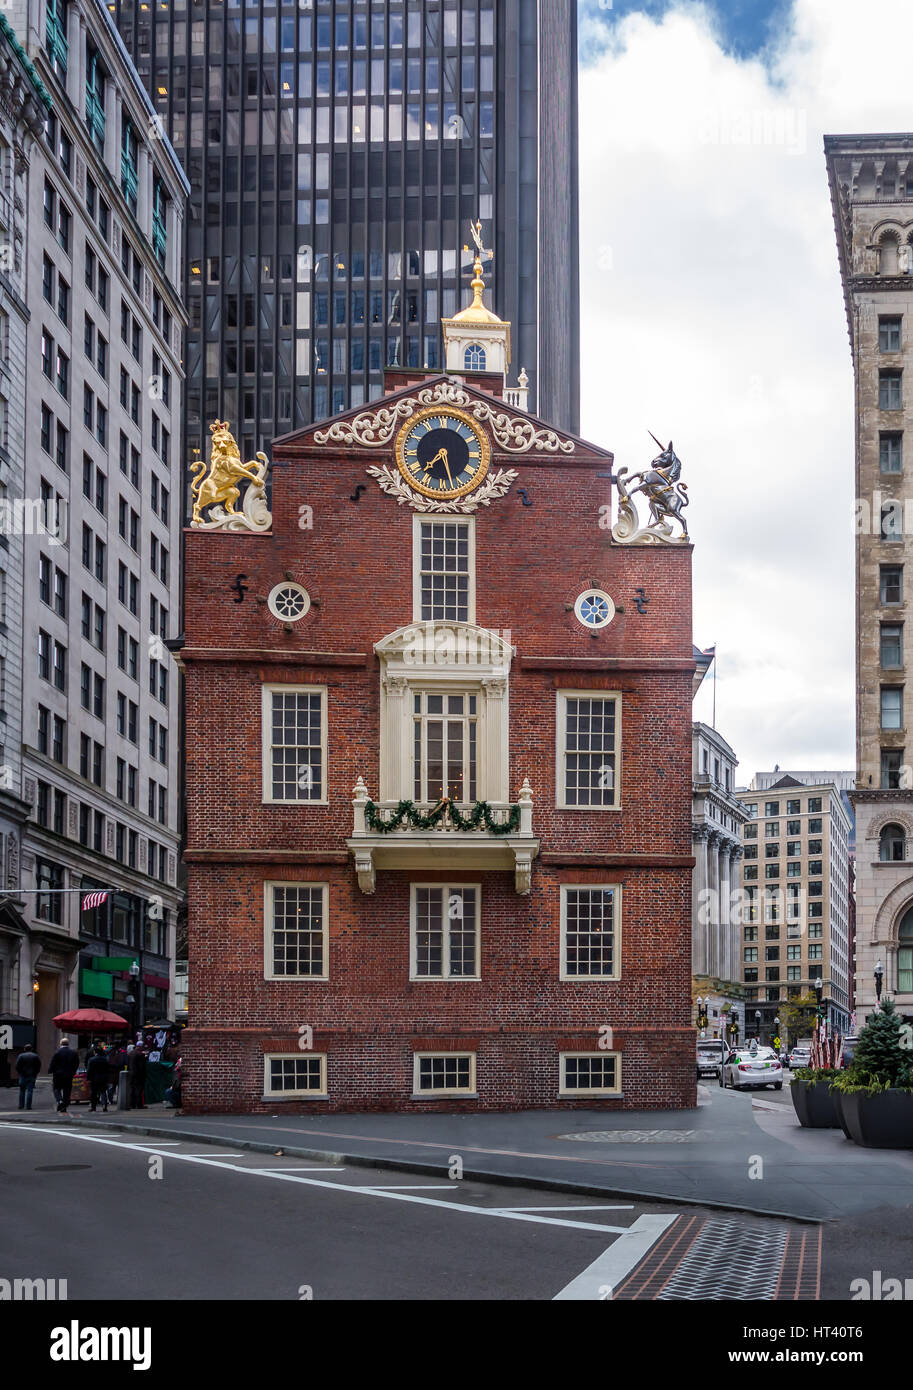 Old State House - Boston, Massachusetts, USA Banque D'Images